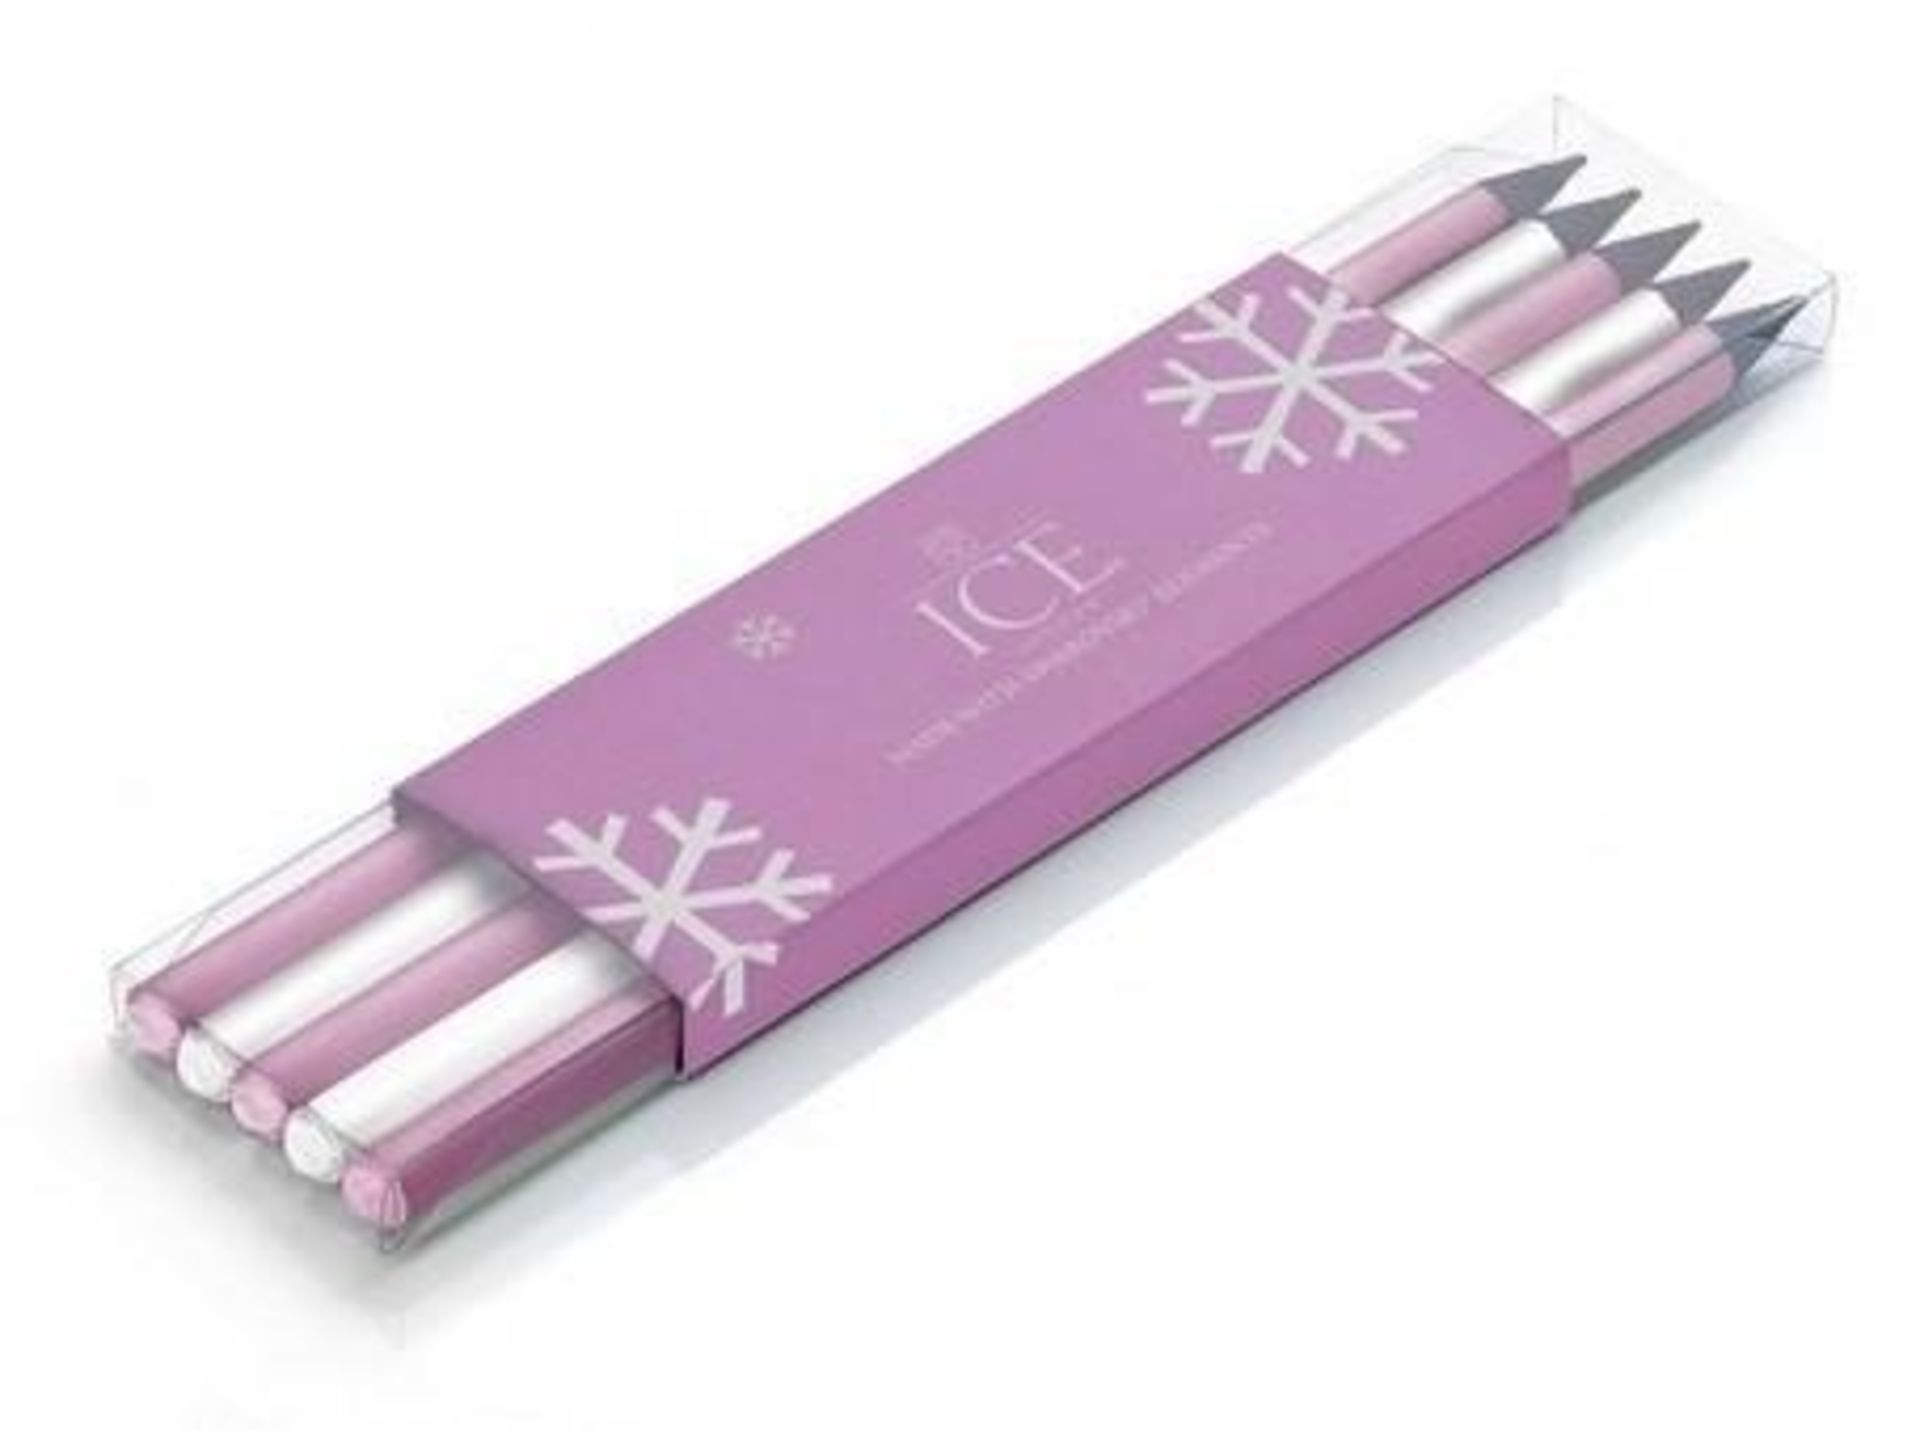 10 x ICE London Christmas Pencil Sets - Colour: PINK - Made With SWAROVSKI® ELEMENTS - Each Set Cont - Image 2 of 4